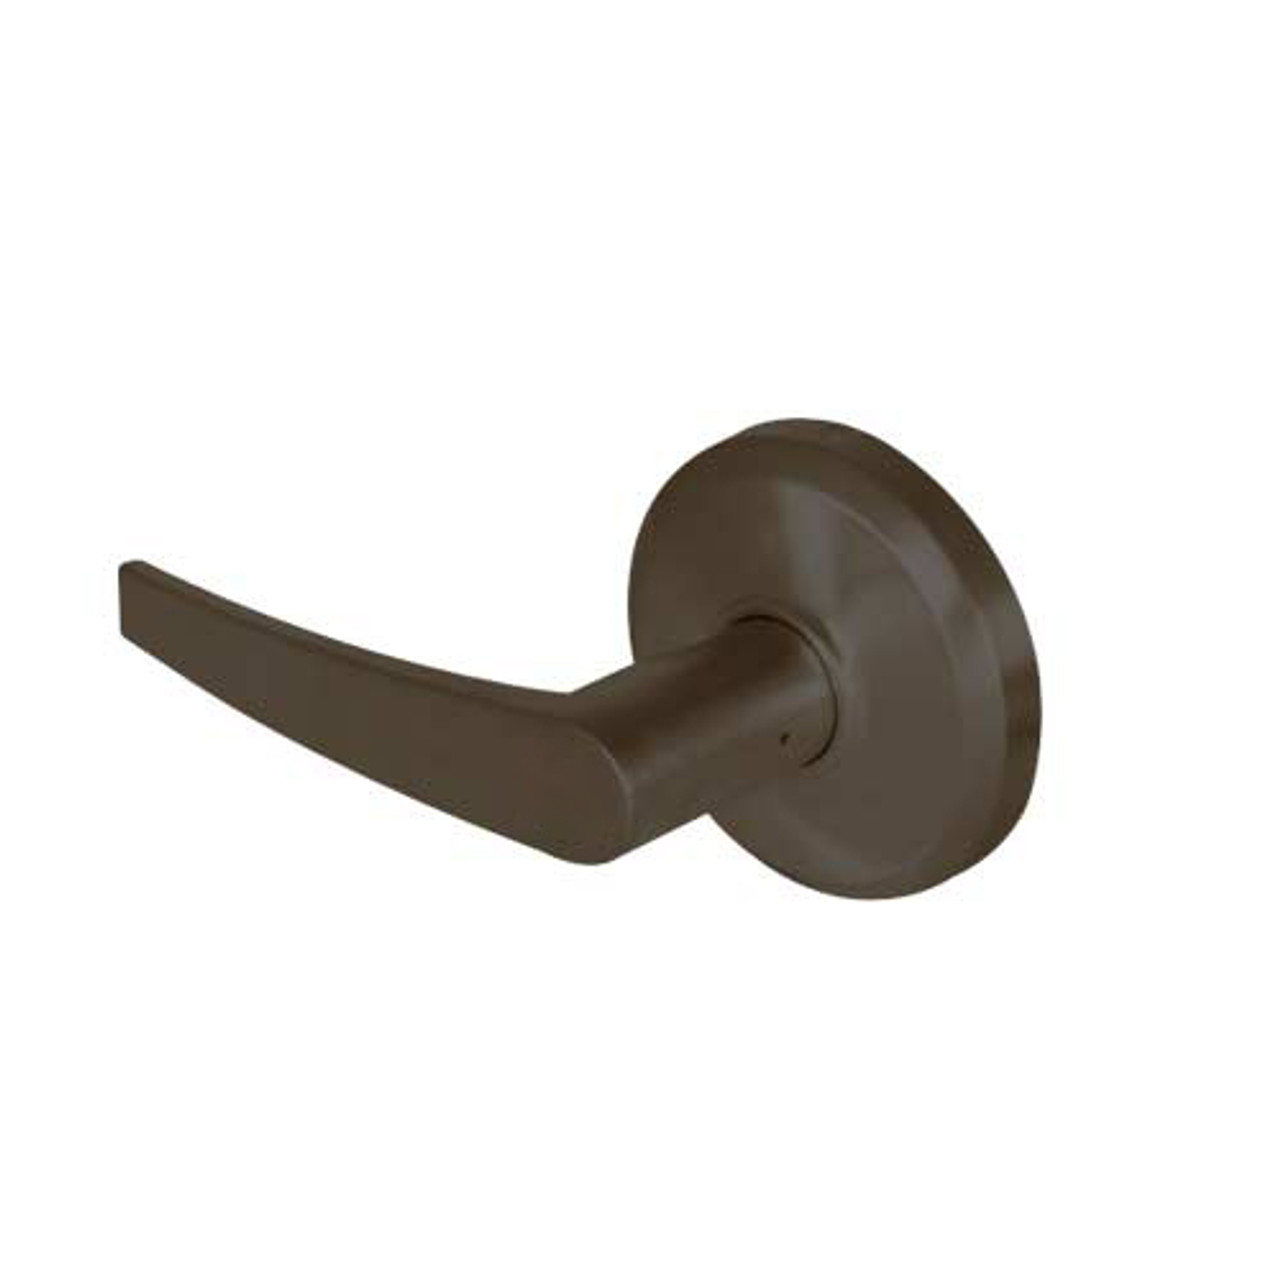 QCL240A613FR4118F Stanley QCL200 Series Cylindrical Privacy Lock with Slate Lever in Oil Rubbed Bronze Finish